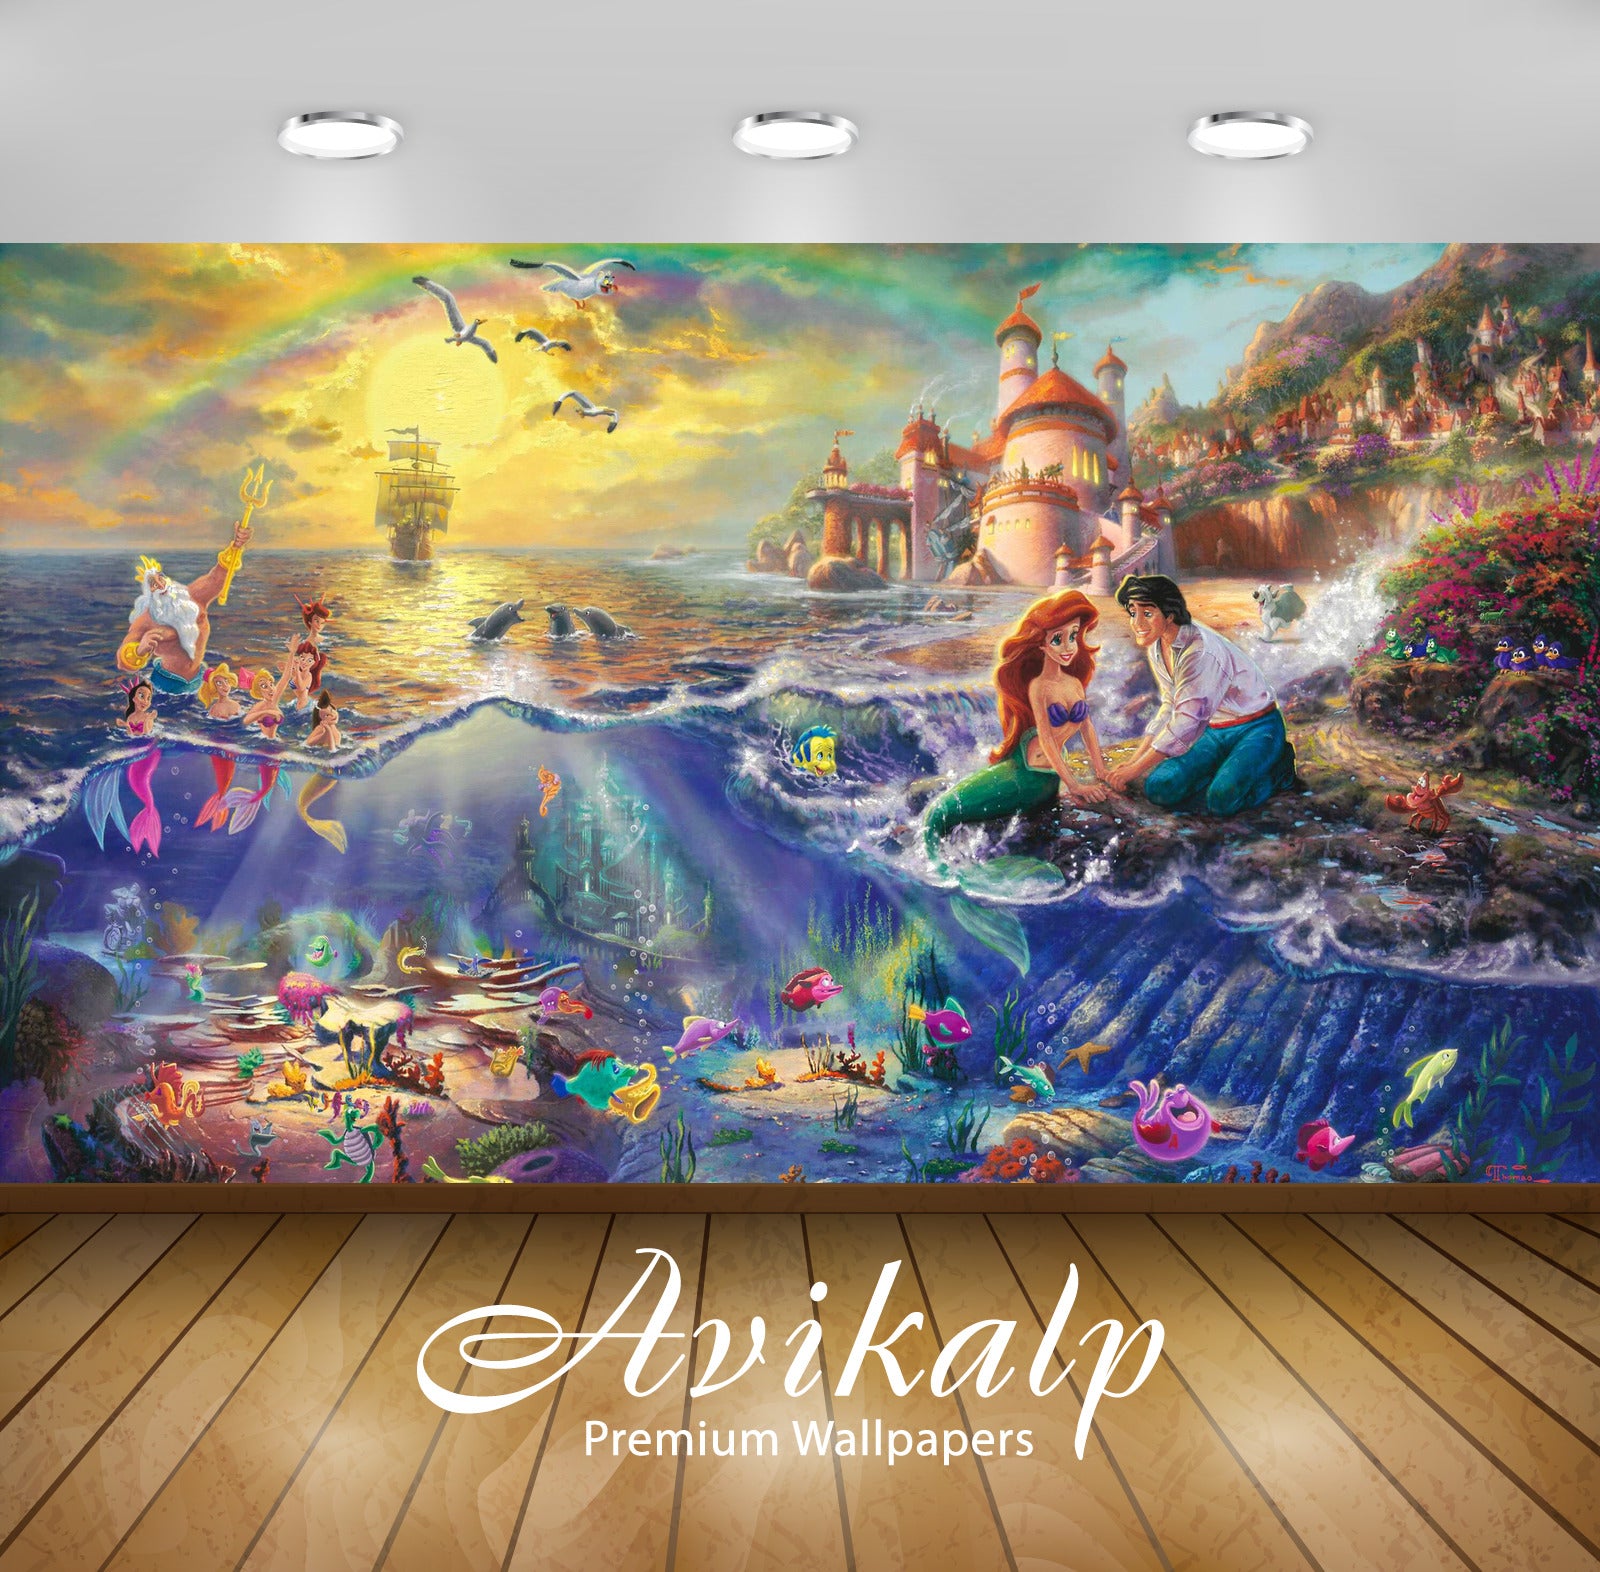 Avikalp Exclusive Little Mermaid AWI1153 HD Wallpapers for Living room, Hall, Kids Room, Kitchen, TV